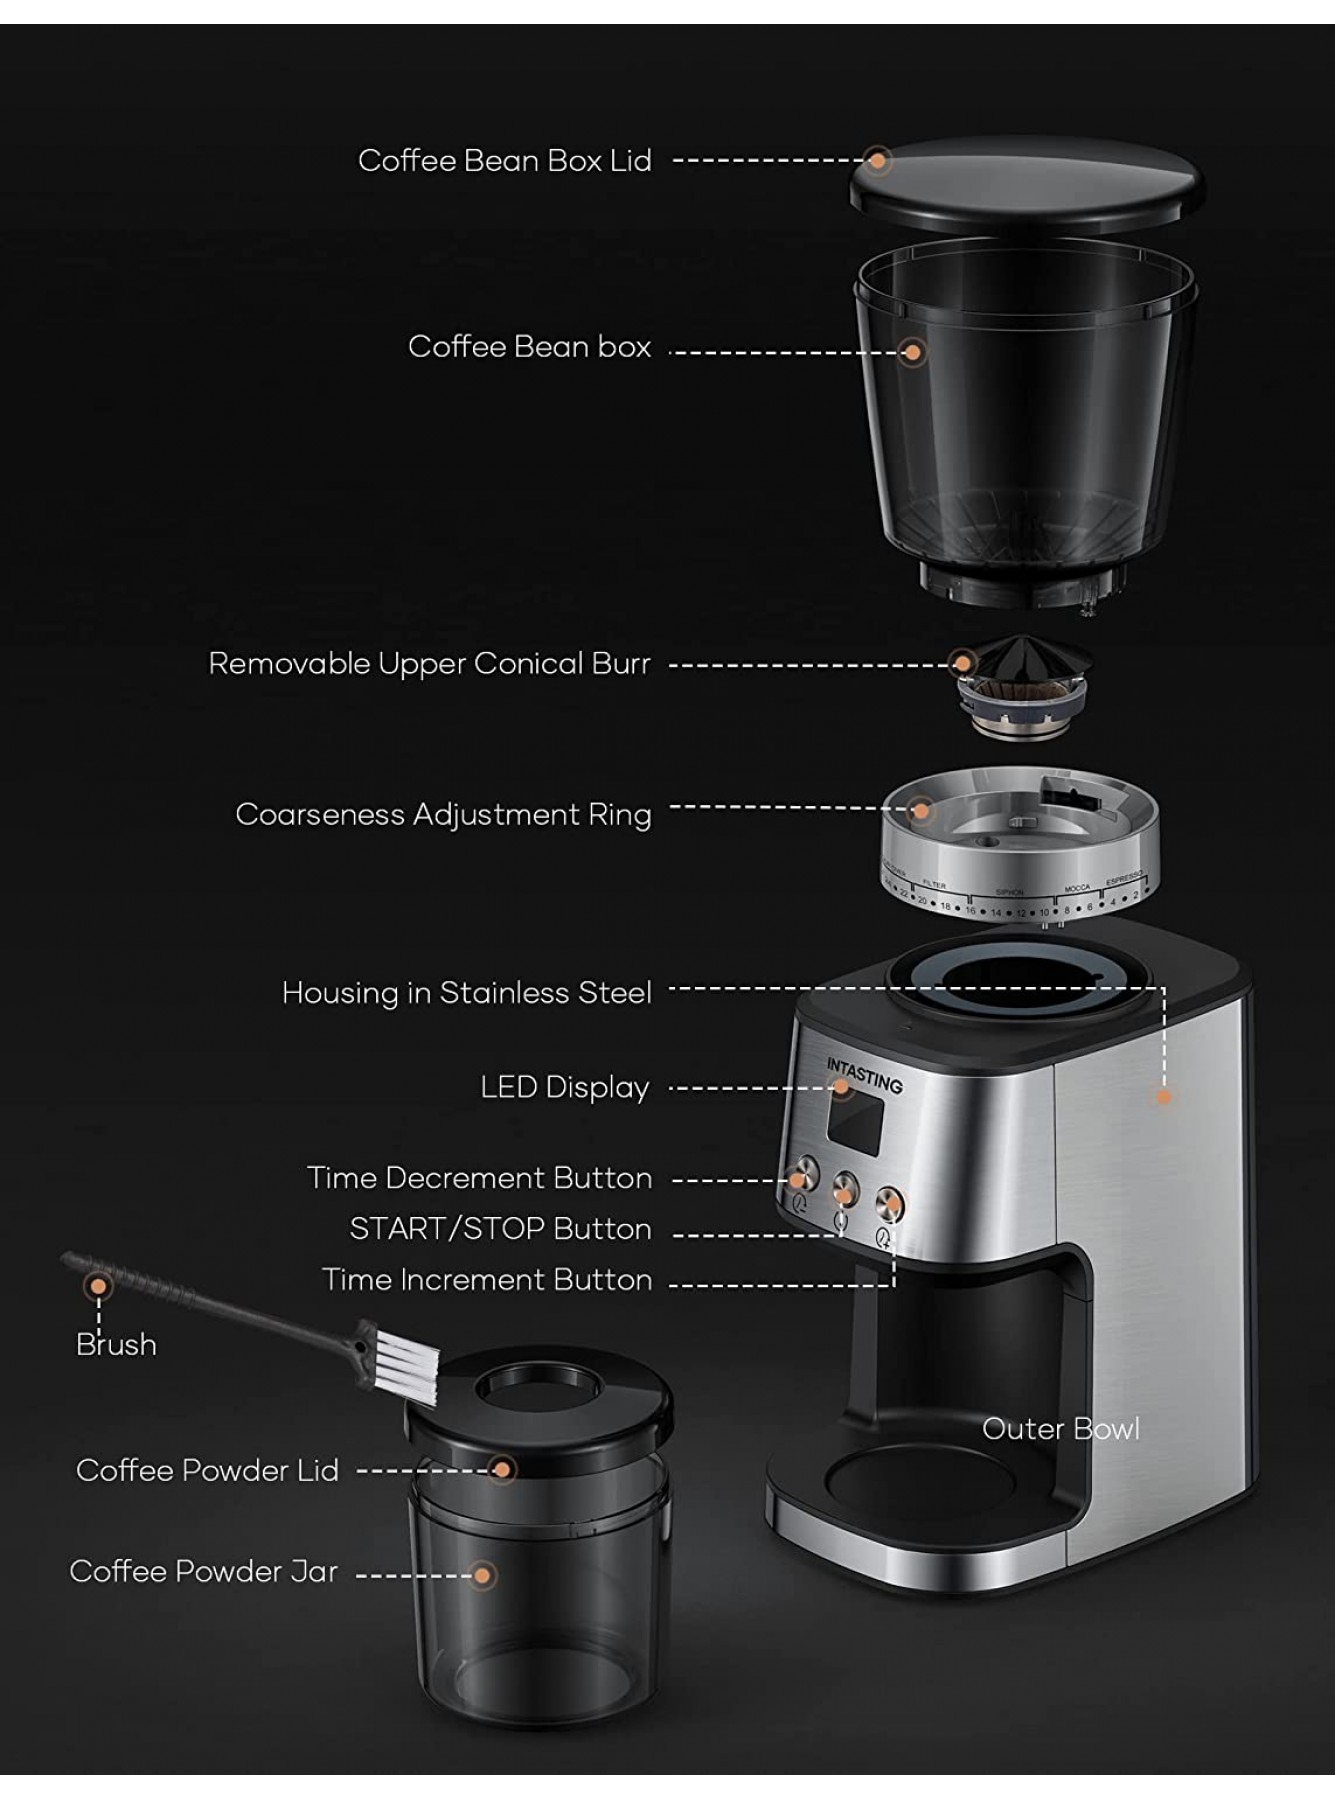 https://www.instagramscraperapi.com/image/cache/data/category_78/intasting-burr-coffee-grinder-coffee-grinder-electric-with-31-precise-grind-settings--19854-1335x1800.jpg